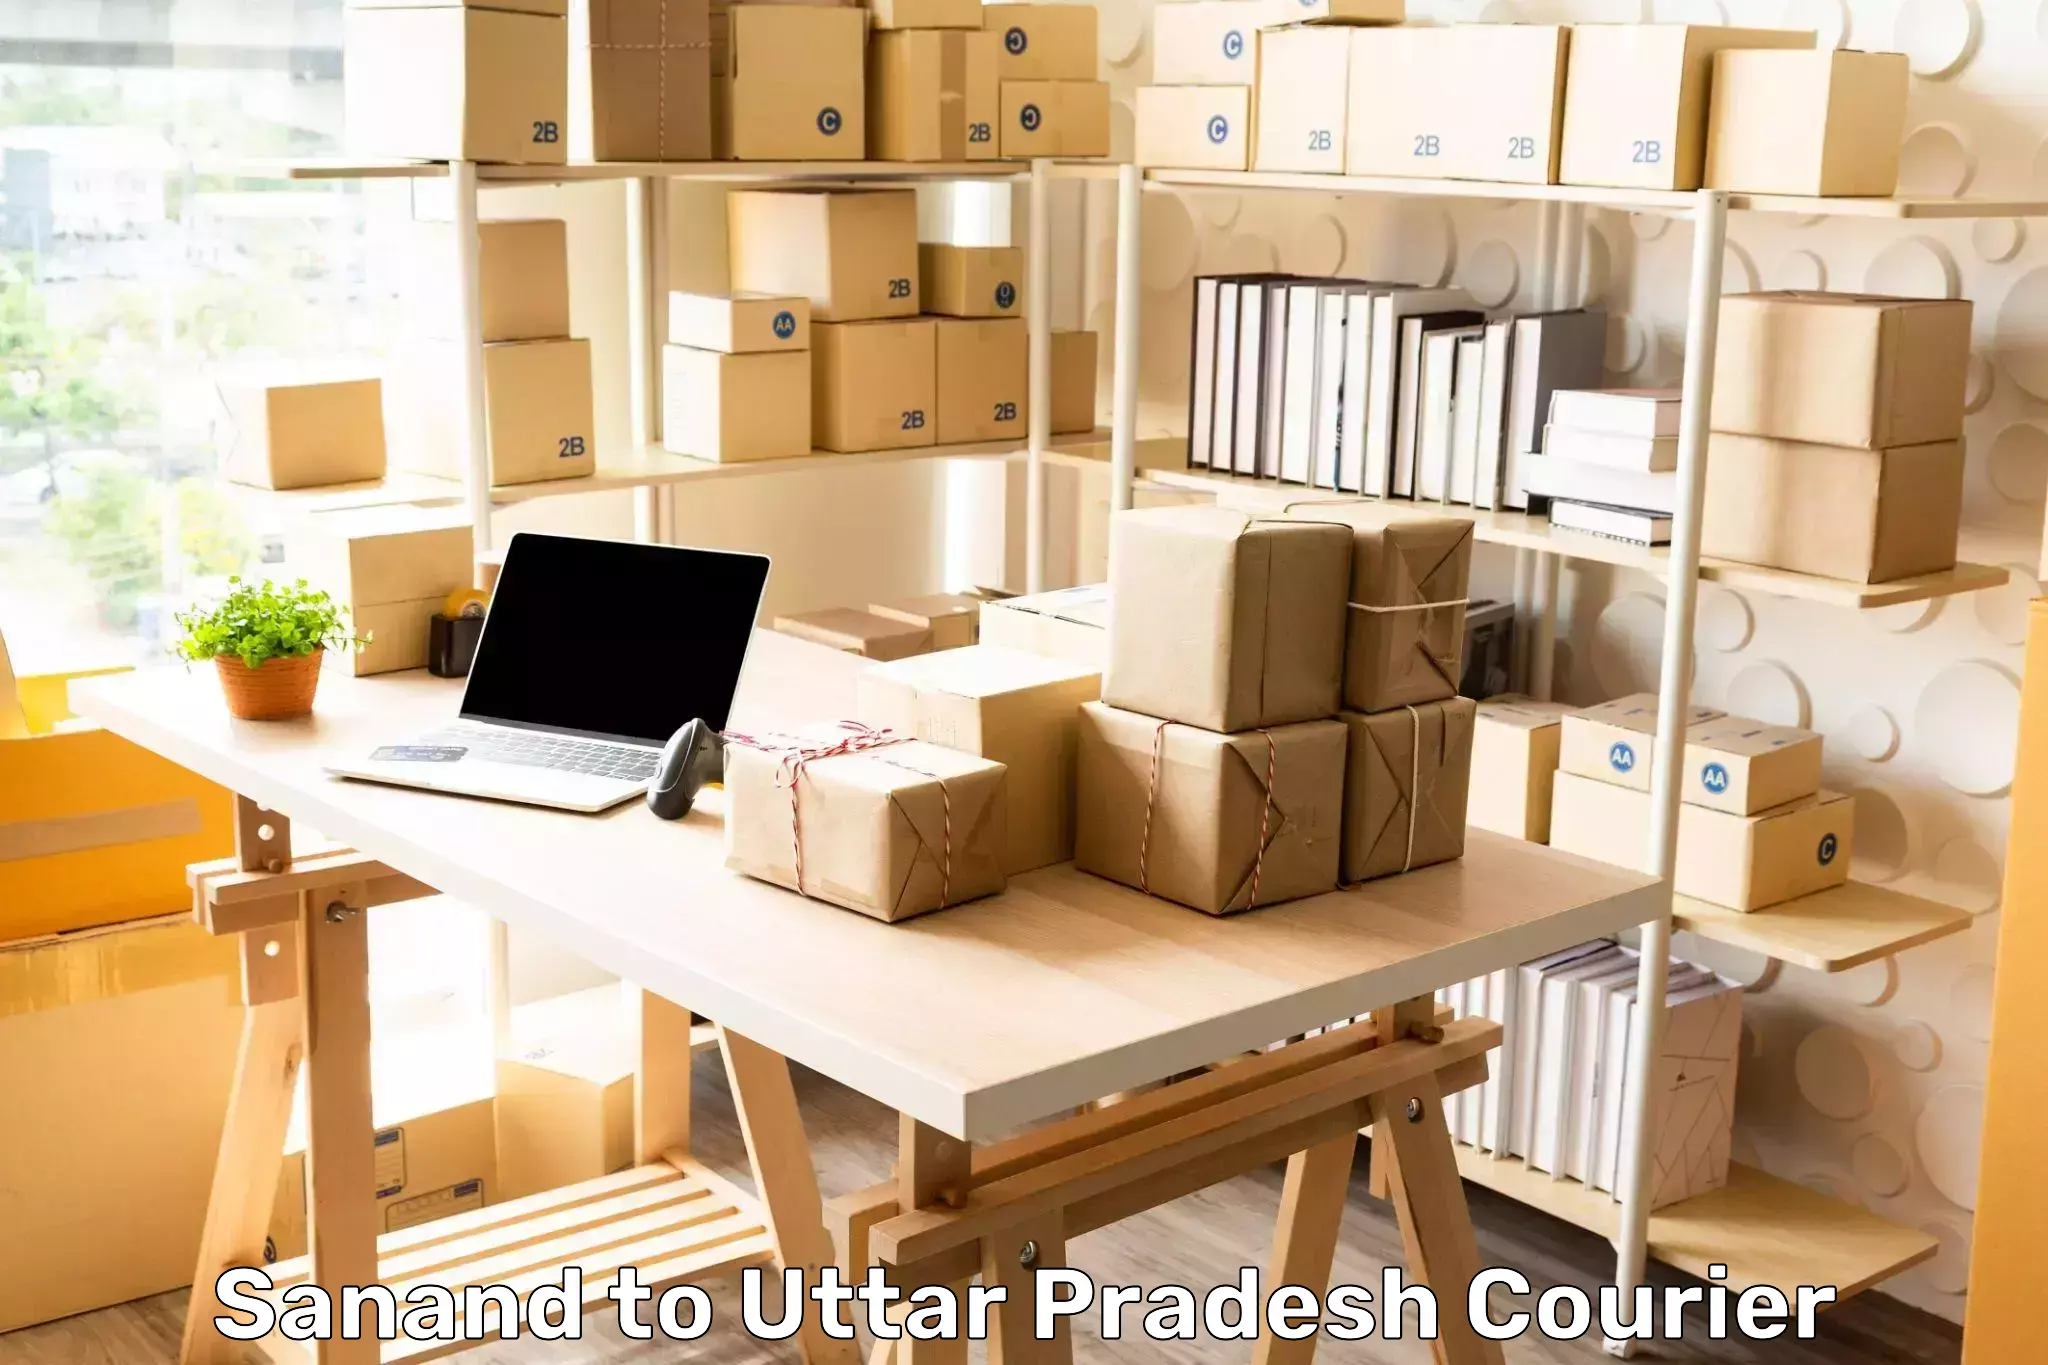 24-hour courier service Sanand to Afzalgarh